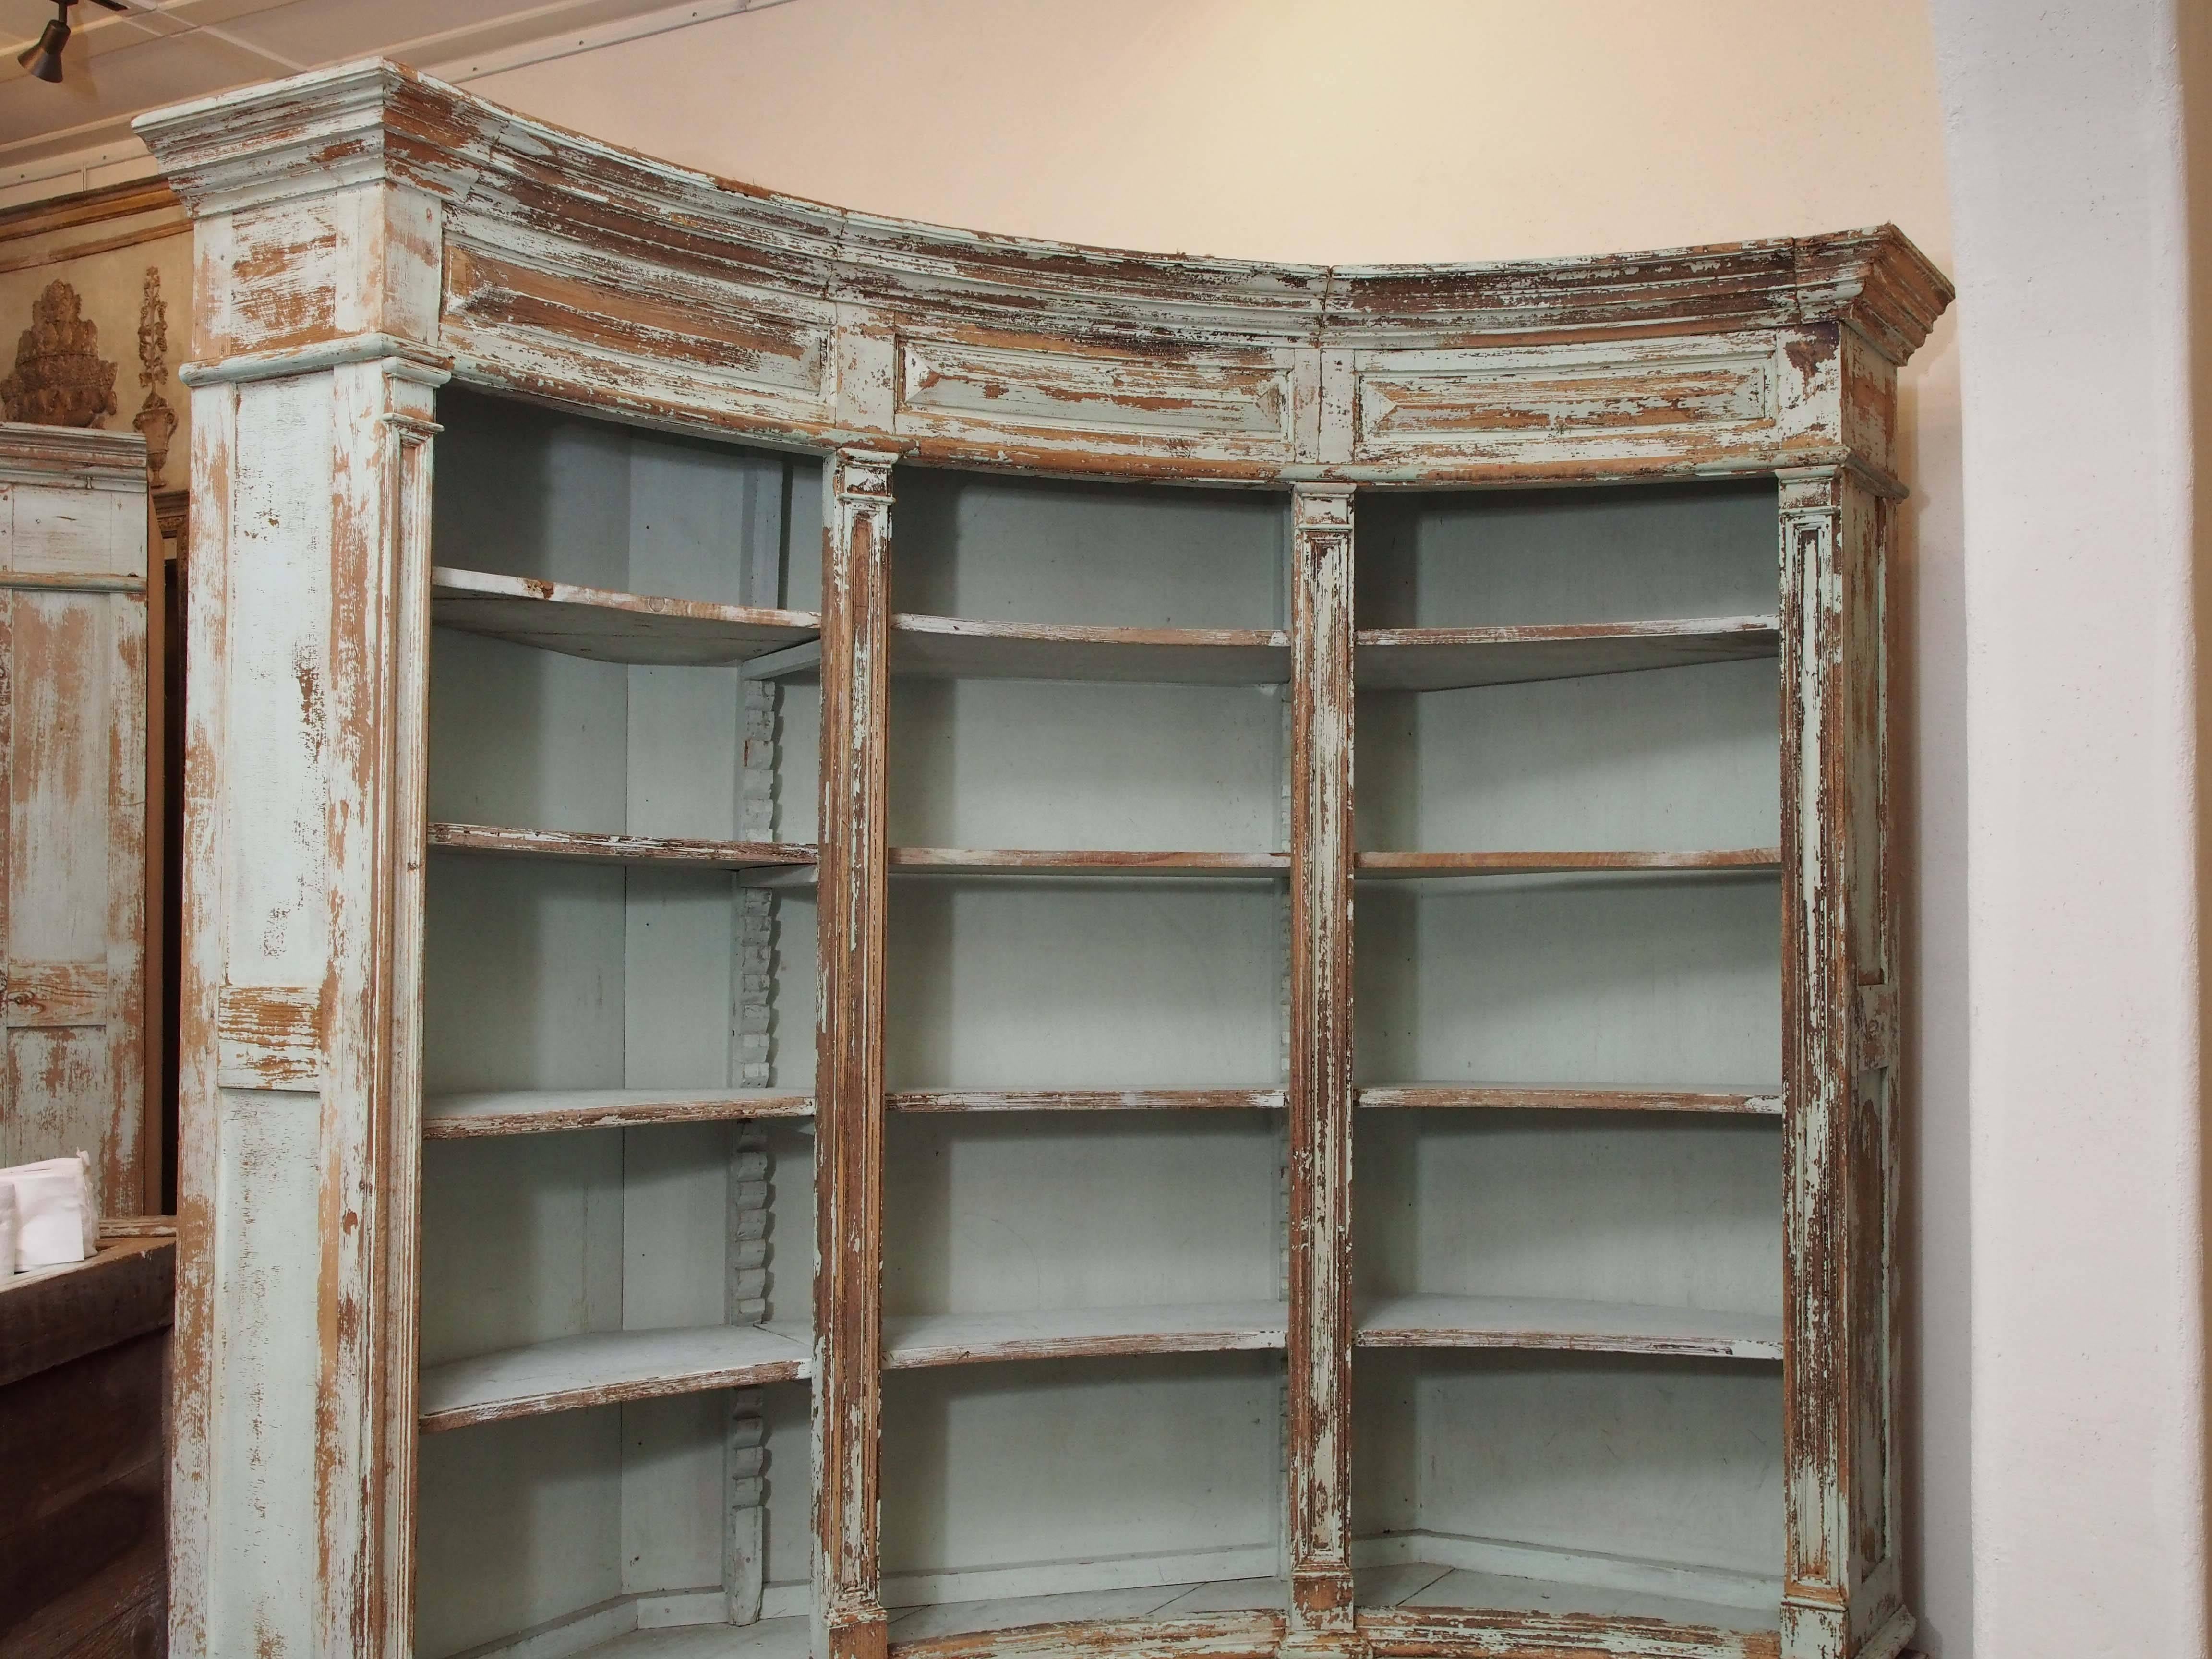 19th century French Directoire style hand-painted and handcrafted curved bibliotheque-apothecary cabinet with three drawers, three doors and adjustable shelves. This is one of a pair that is offered separately. These were originally in a herbalist